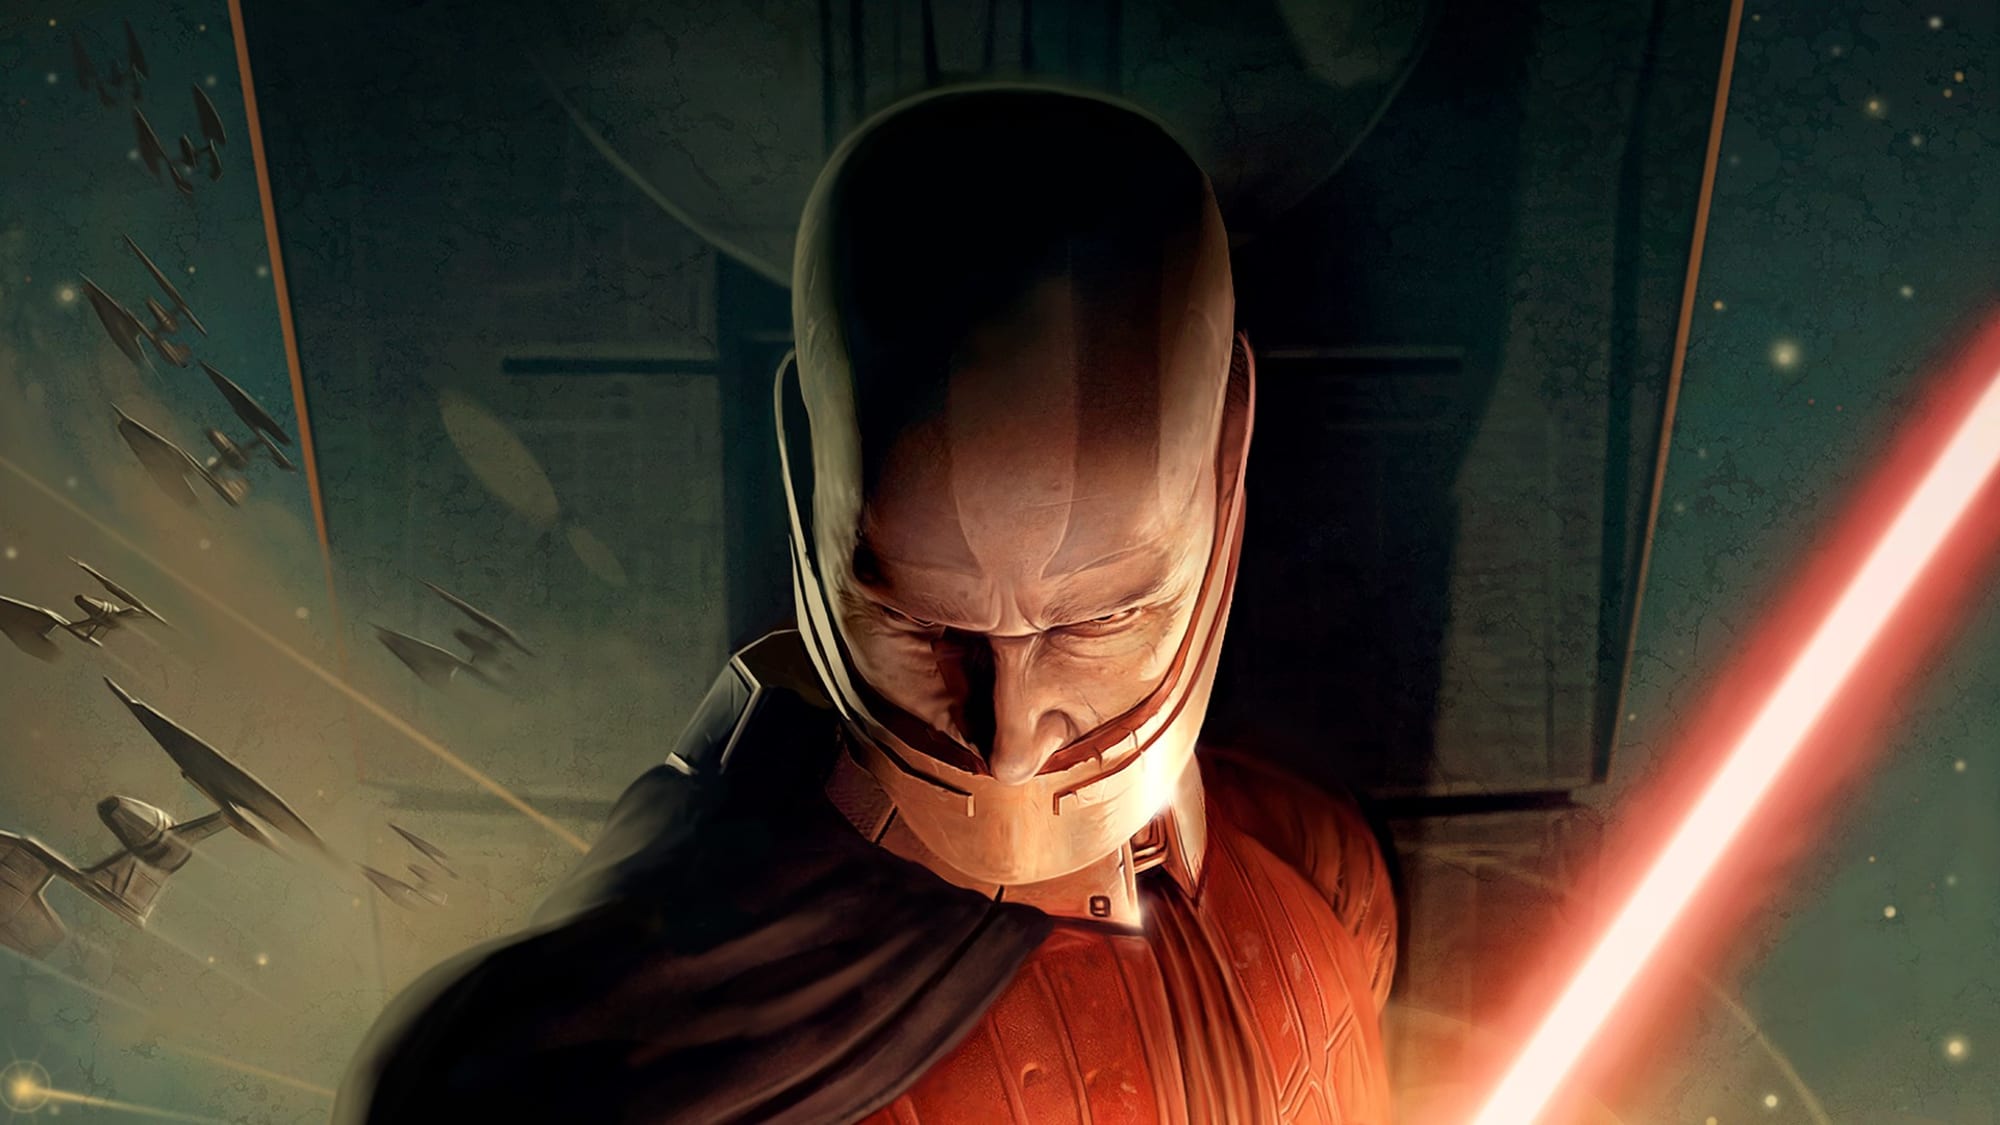 is-the-star-wars-knights-of-the-old-republic-video-game-canon